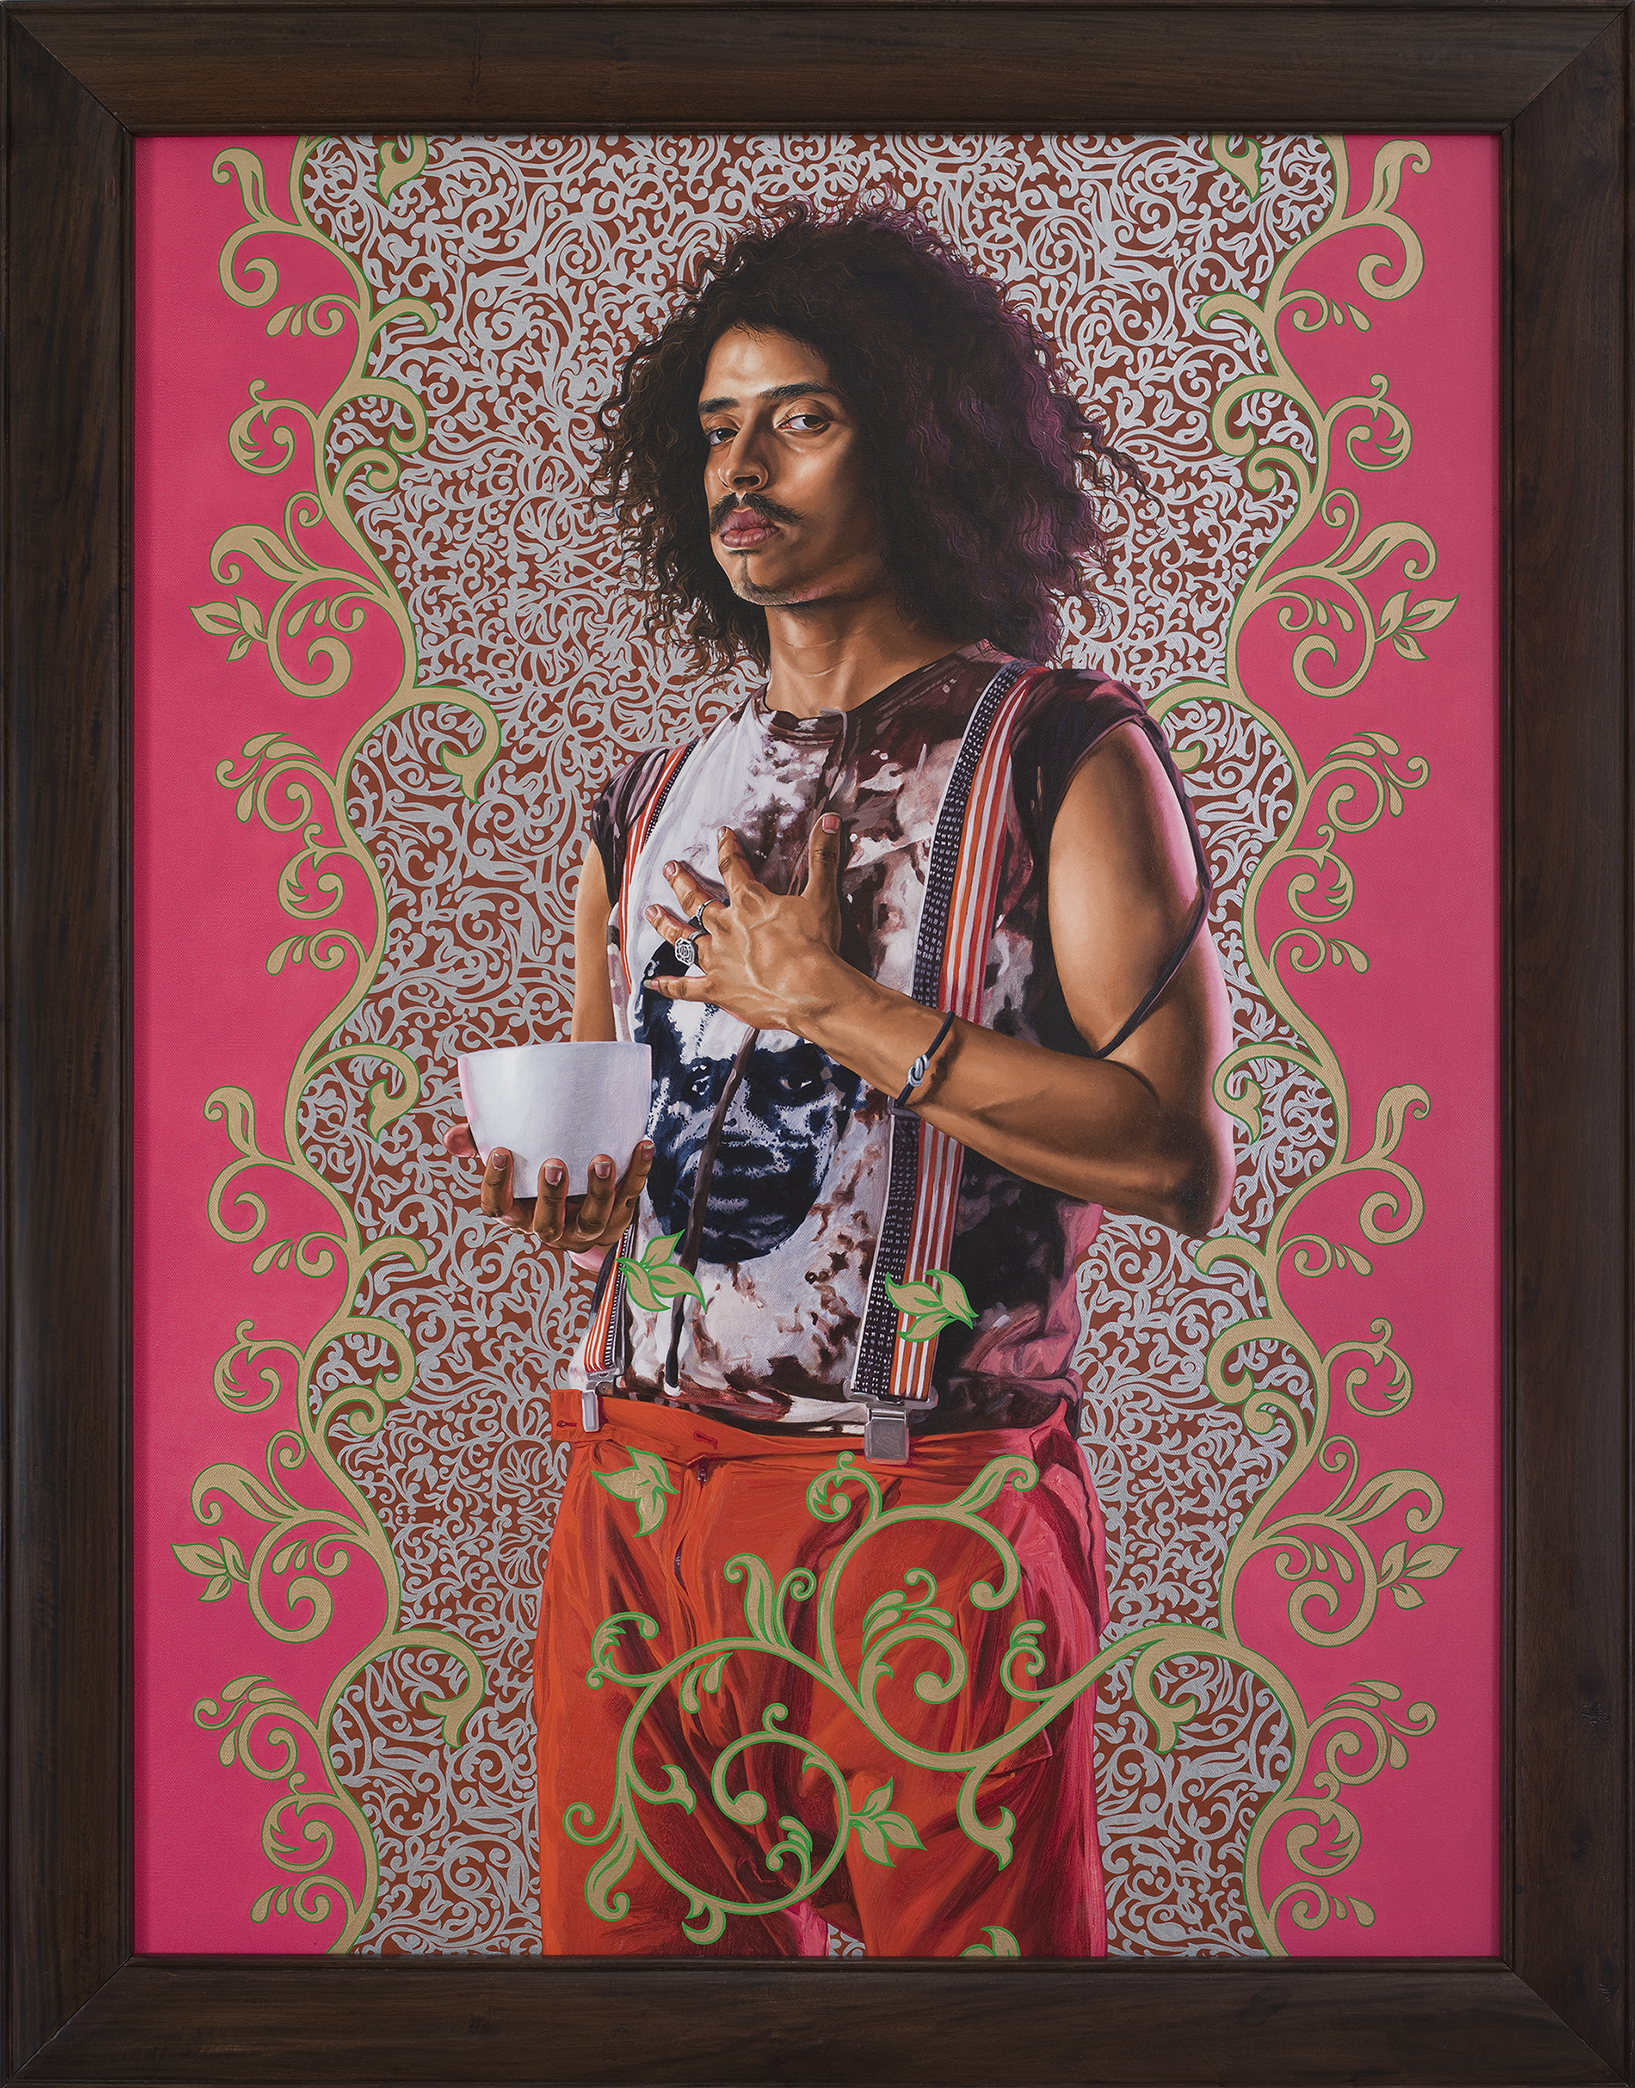 Kehinde Wiley | The World Stage: France | Saint Jerome, 2012 Oil on Canvas. | 4